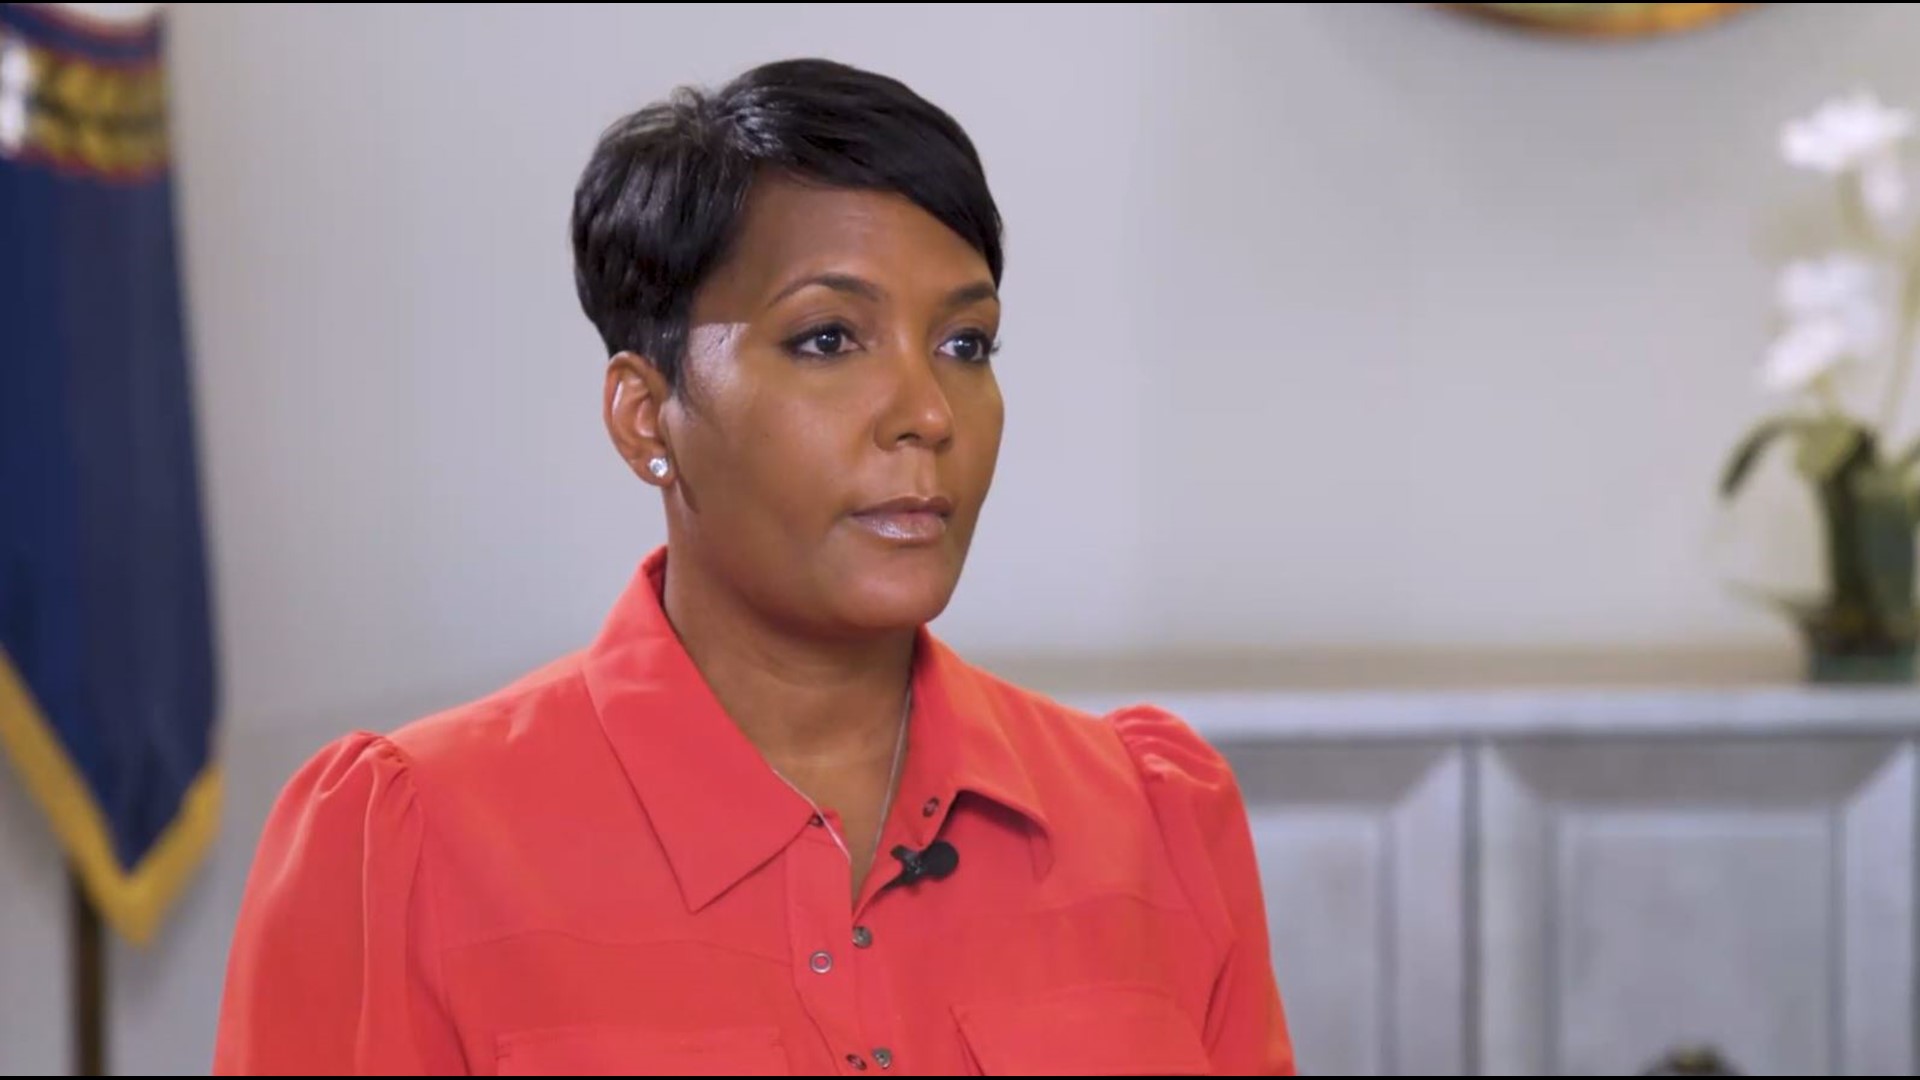 Mayor Keisha Lance Bottoms sat down with 11Alive's Matt Pearl to talk about the Atlanta City Detention Center.